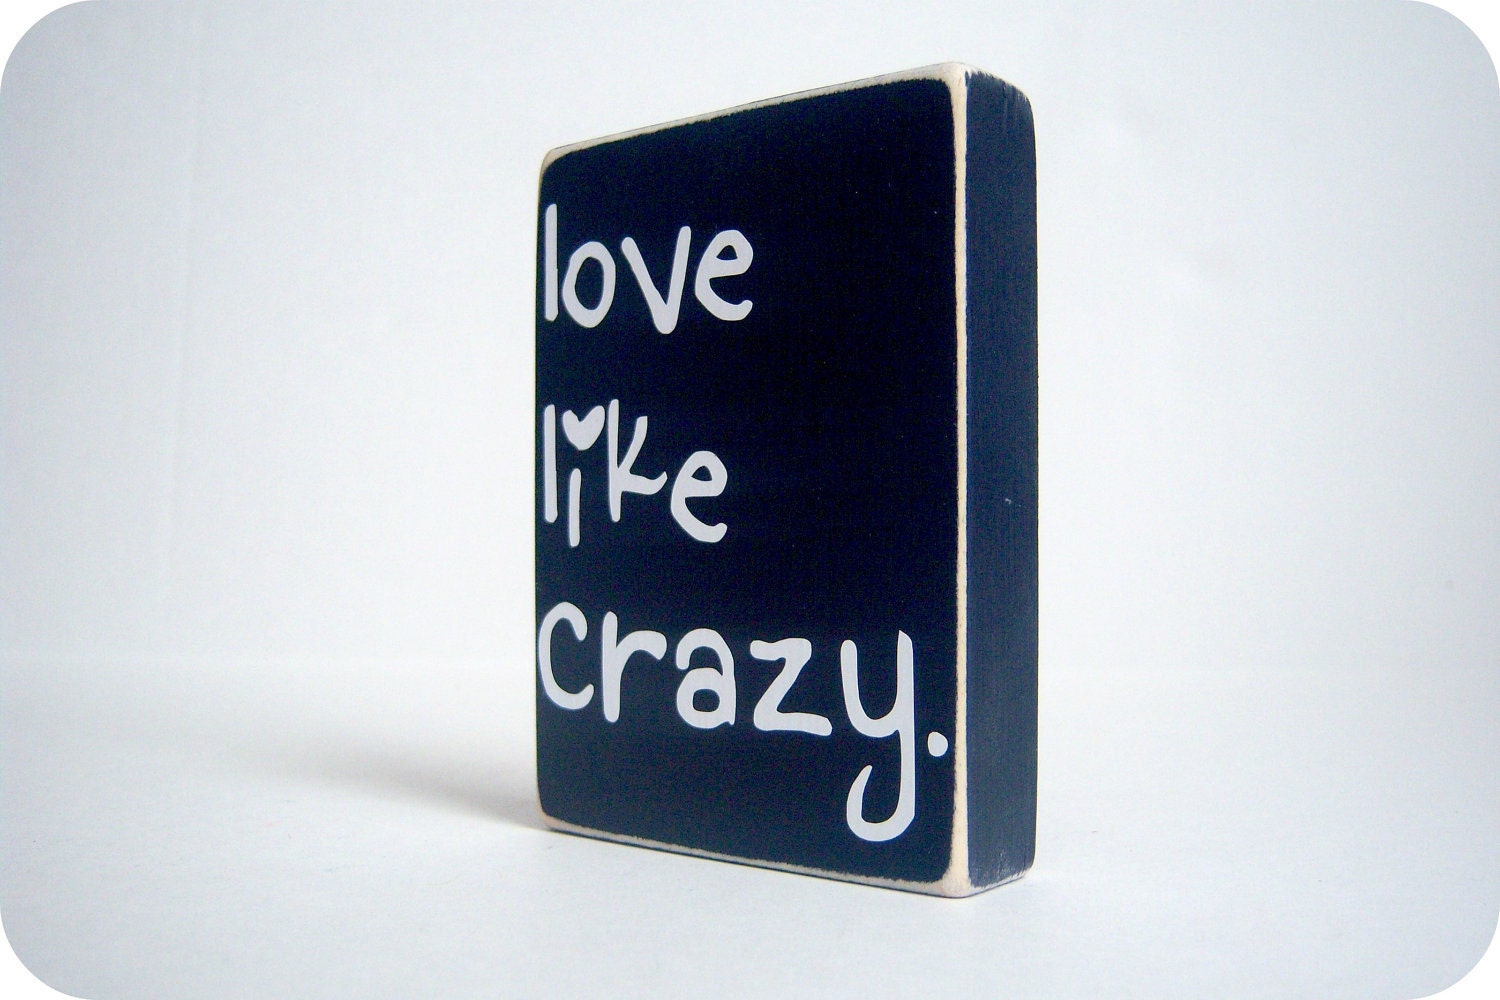 Love Like Crazy Home Decor by bubblewrappd on Etsy